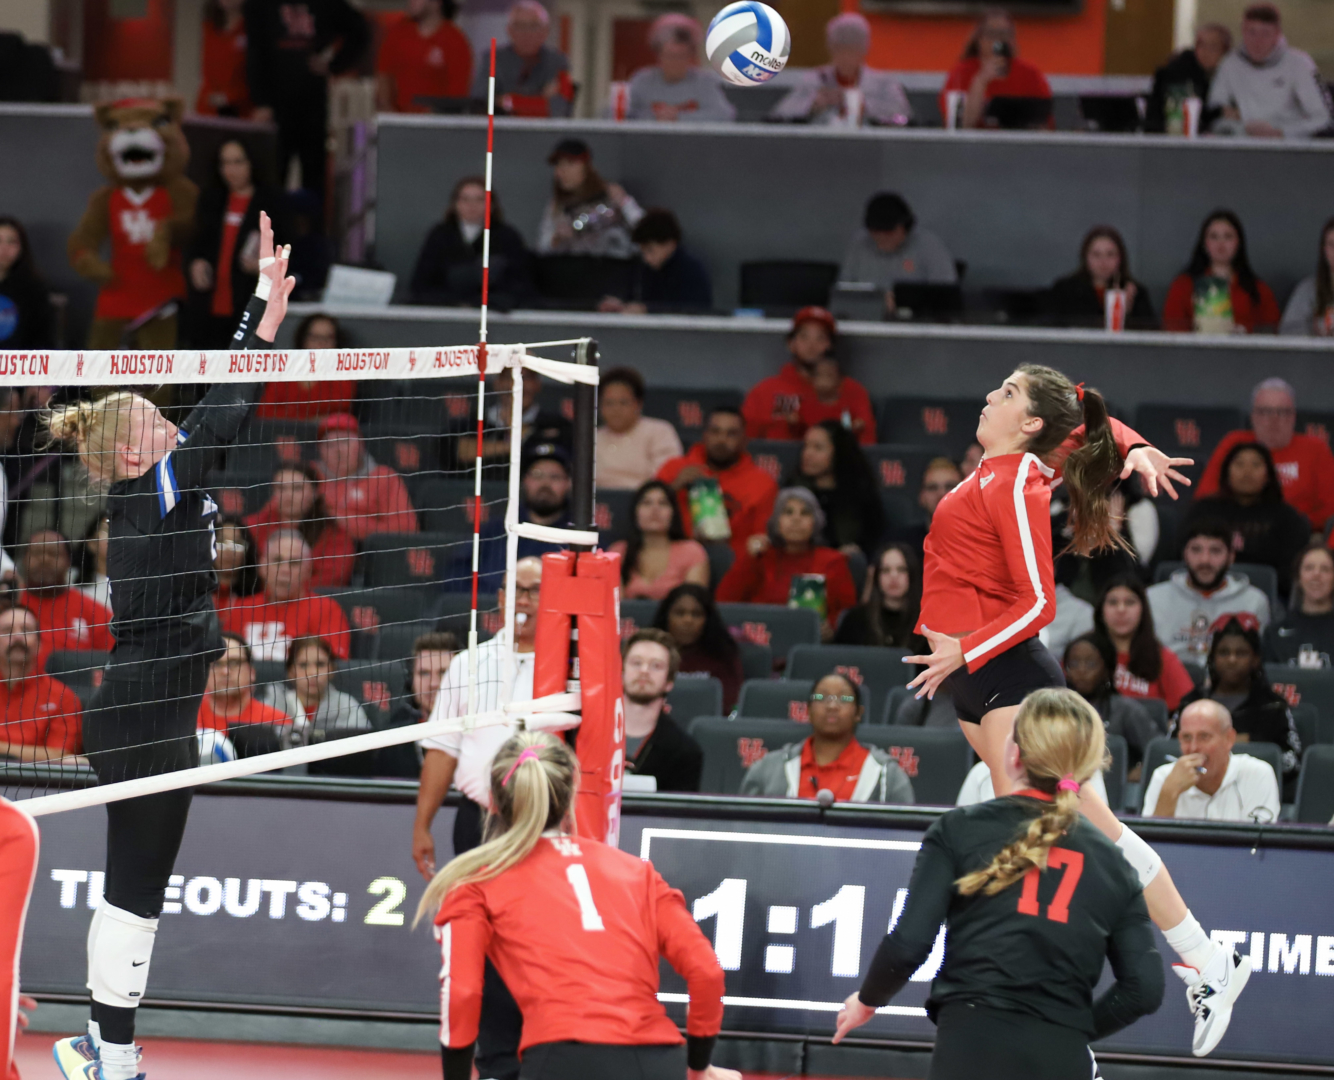 UH volleyball has won a school-record 19 straight matches. | James Mueller/The Cougar